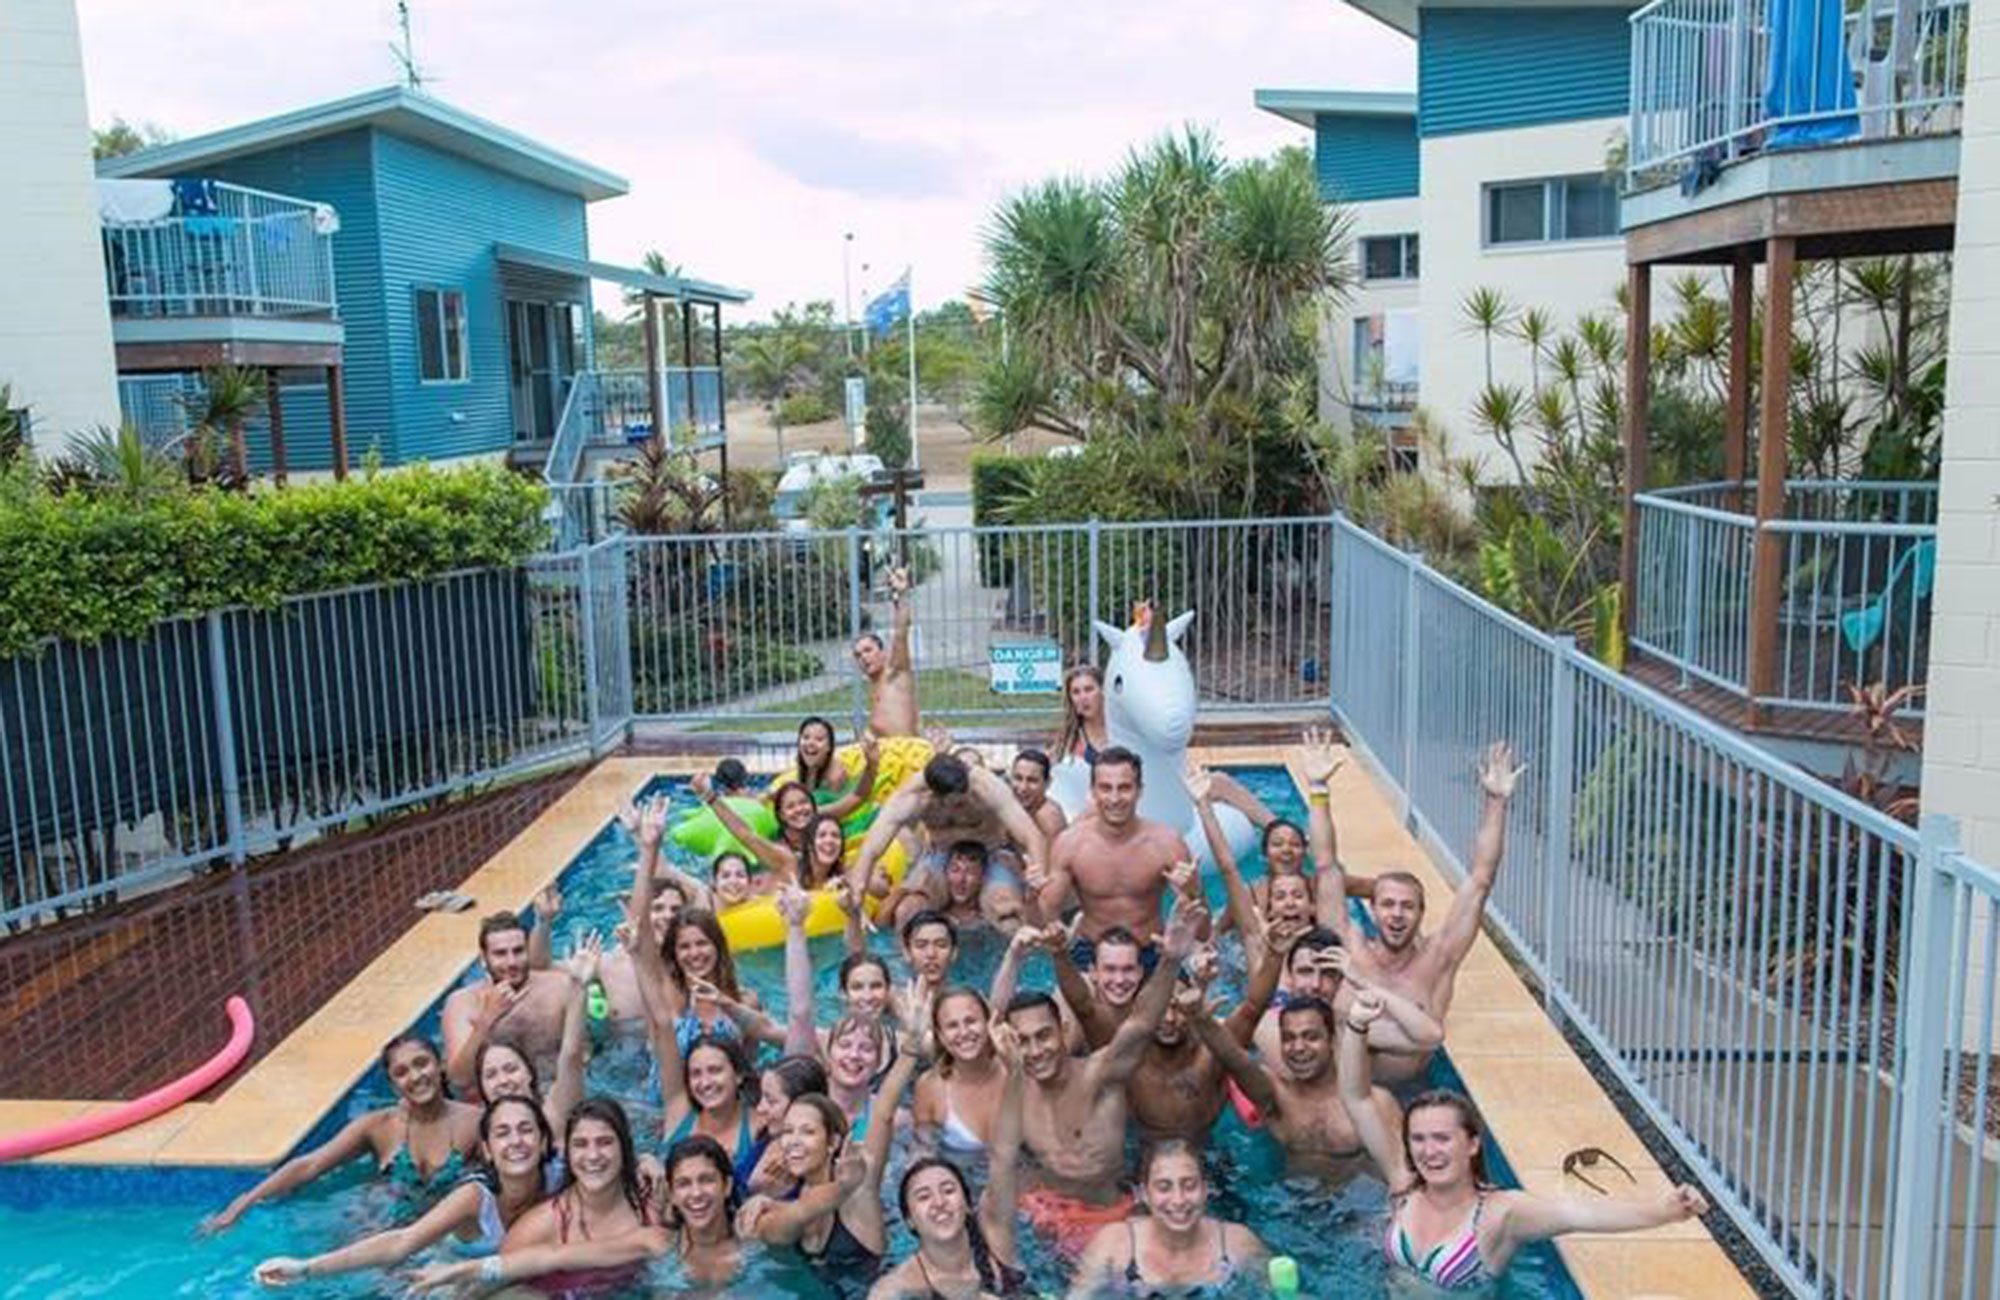 ida and her friends have a pool party in Australia